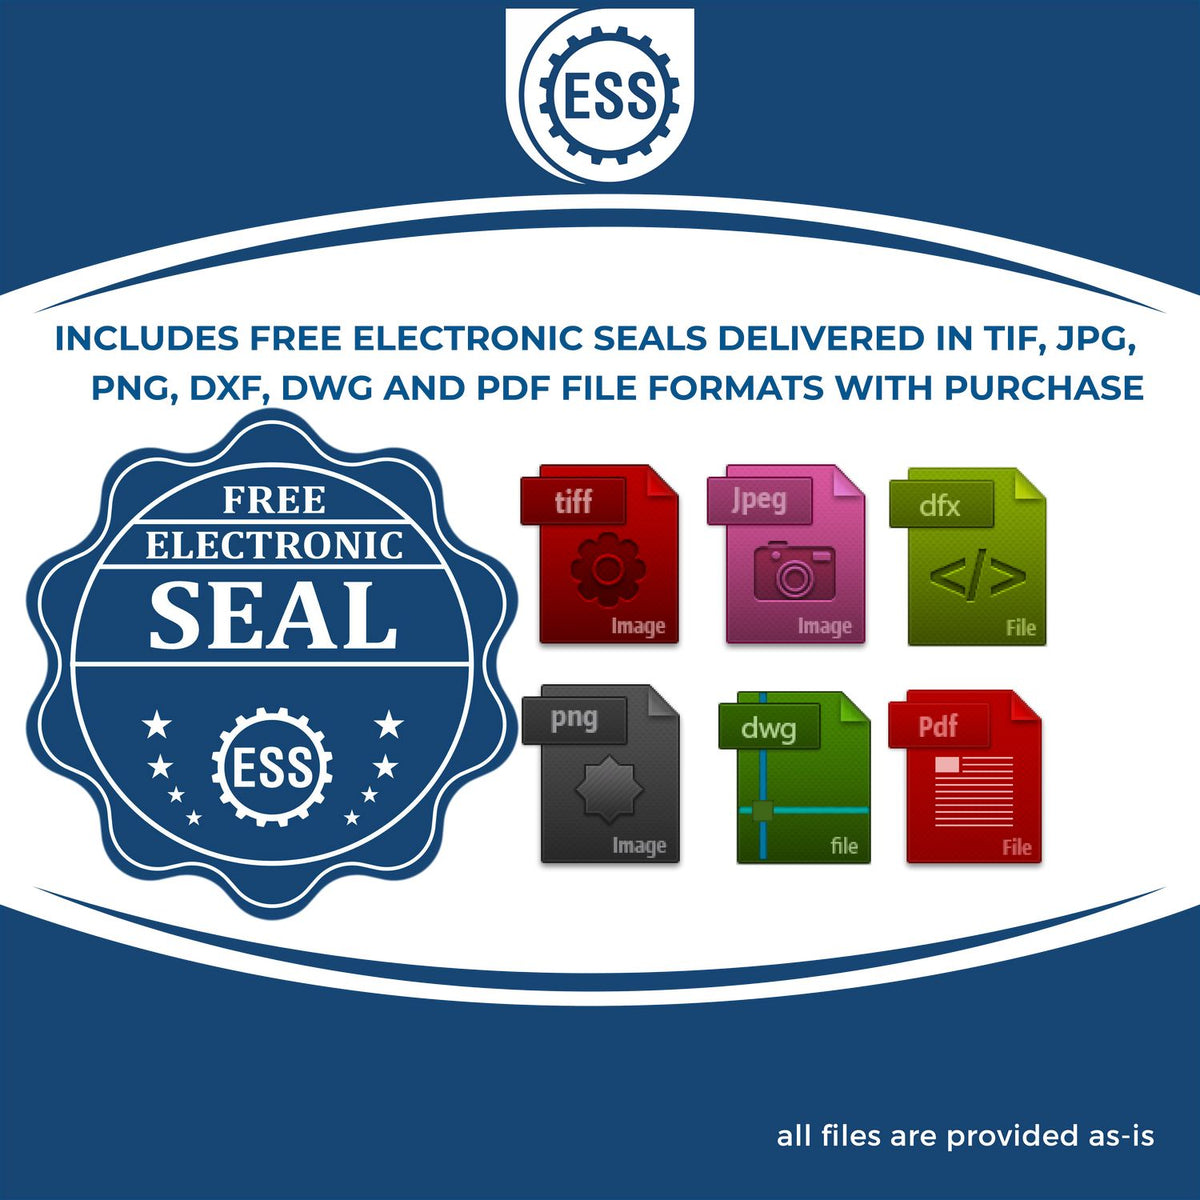 An infographic for the free electronic seal for the Slim Pre-Inked Minnesota Landscape Architect Seal Stamp illustrating the different file type icons such as DXF, DWG, TIF, JPG and PNG.